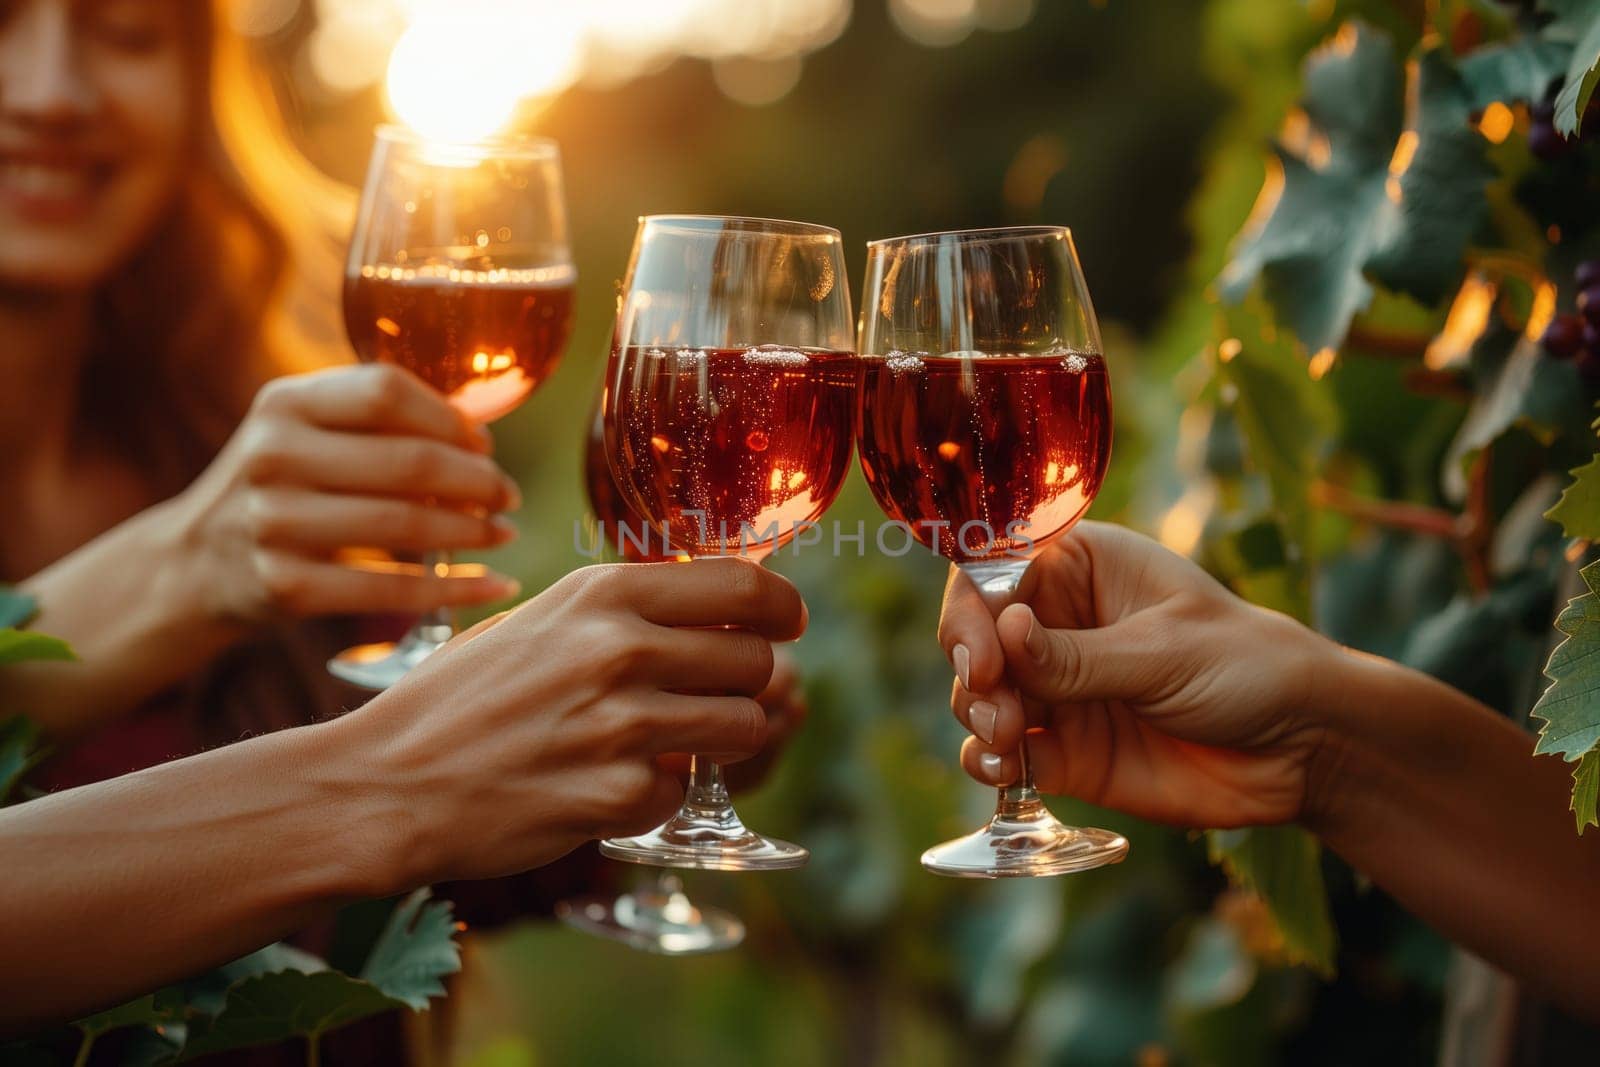 A group of individuals is making a celebratory gesture with wine glasses at a vineyard, enjoying alcoholic beverages in elegant stemware